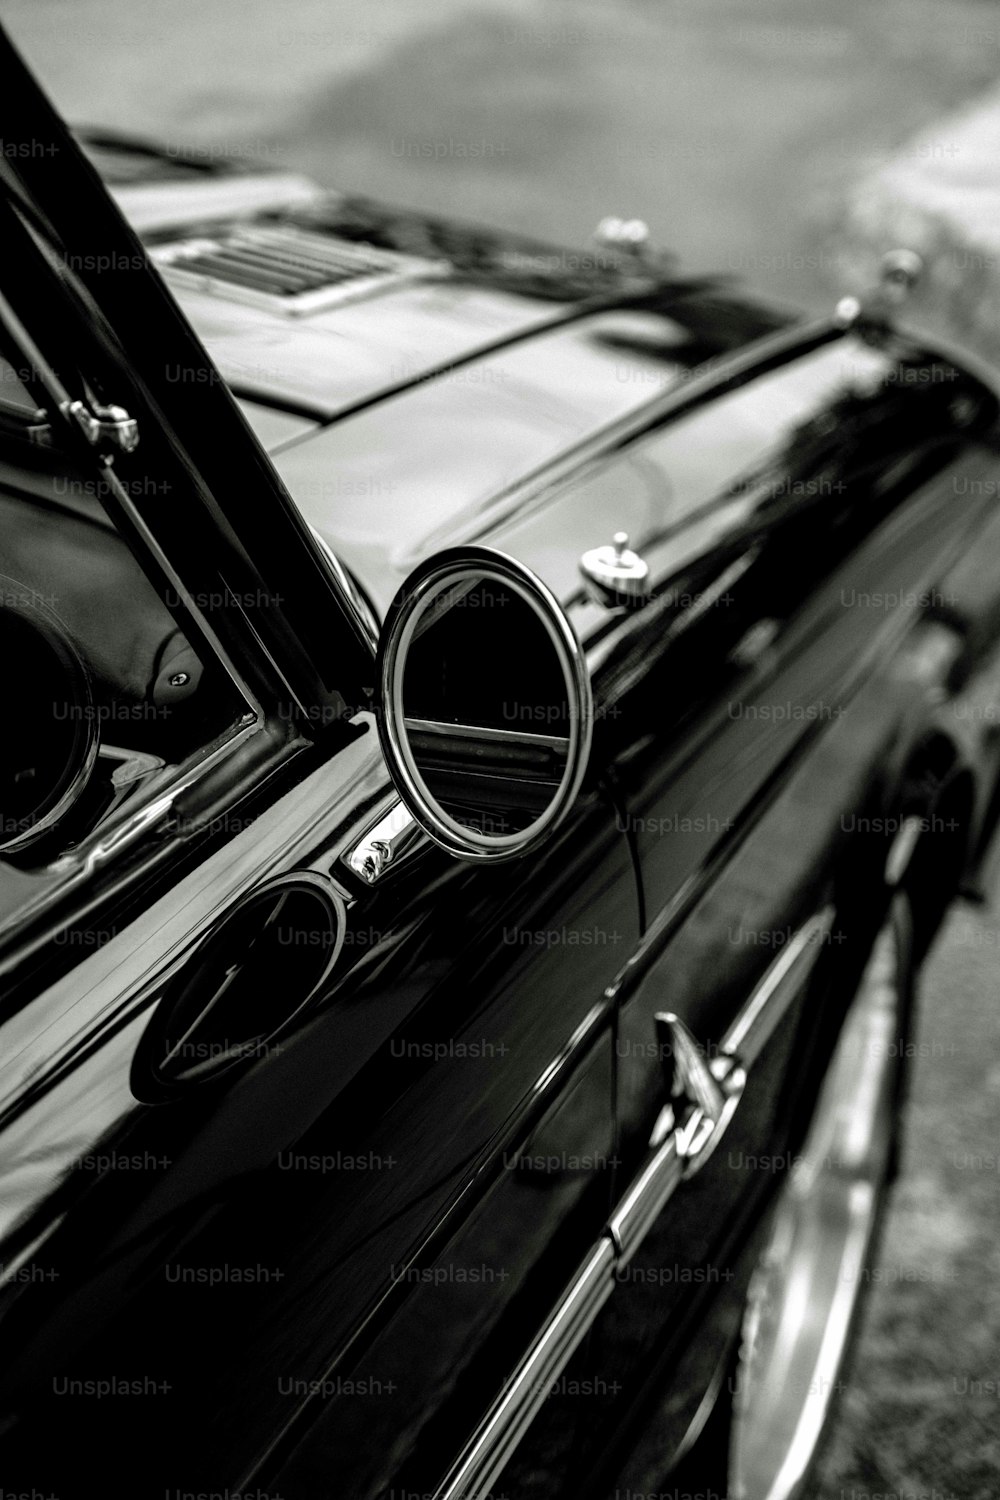 a black and white photo of a classic car